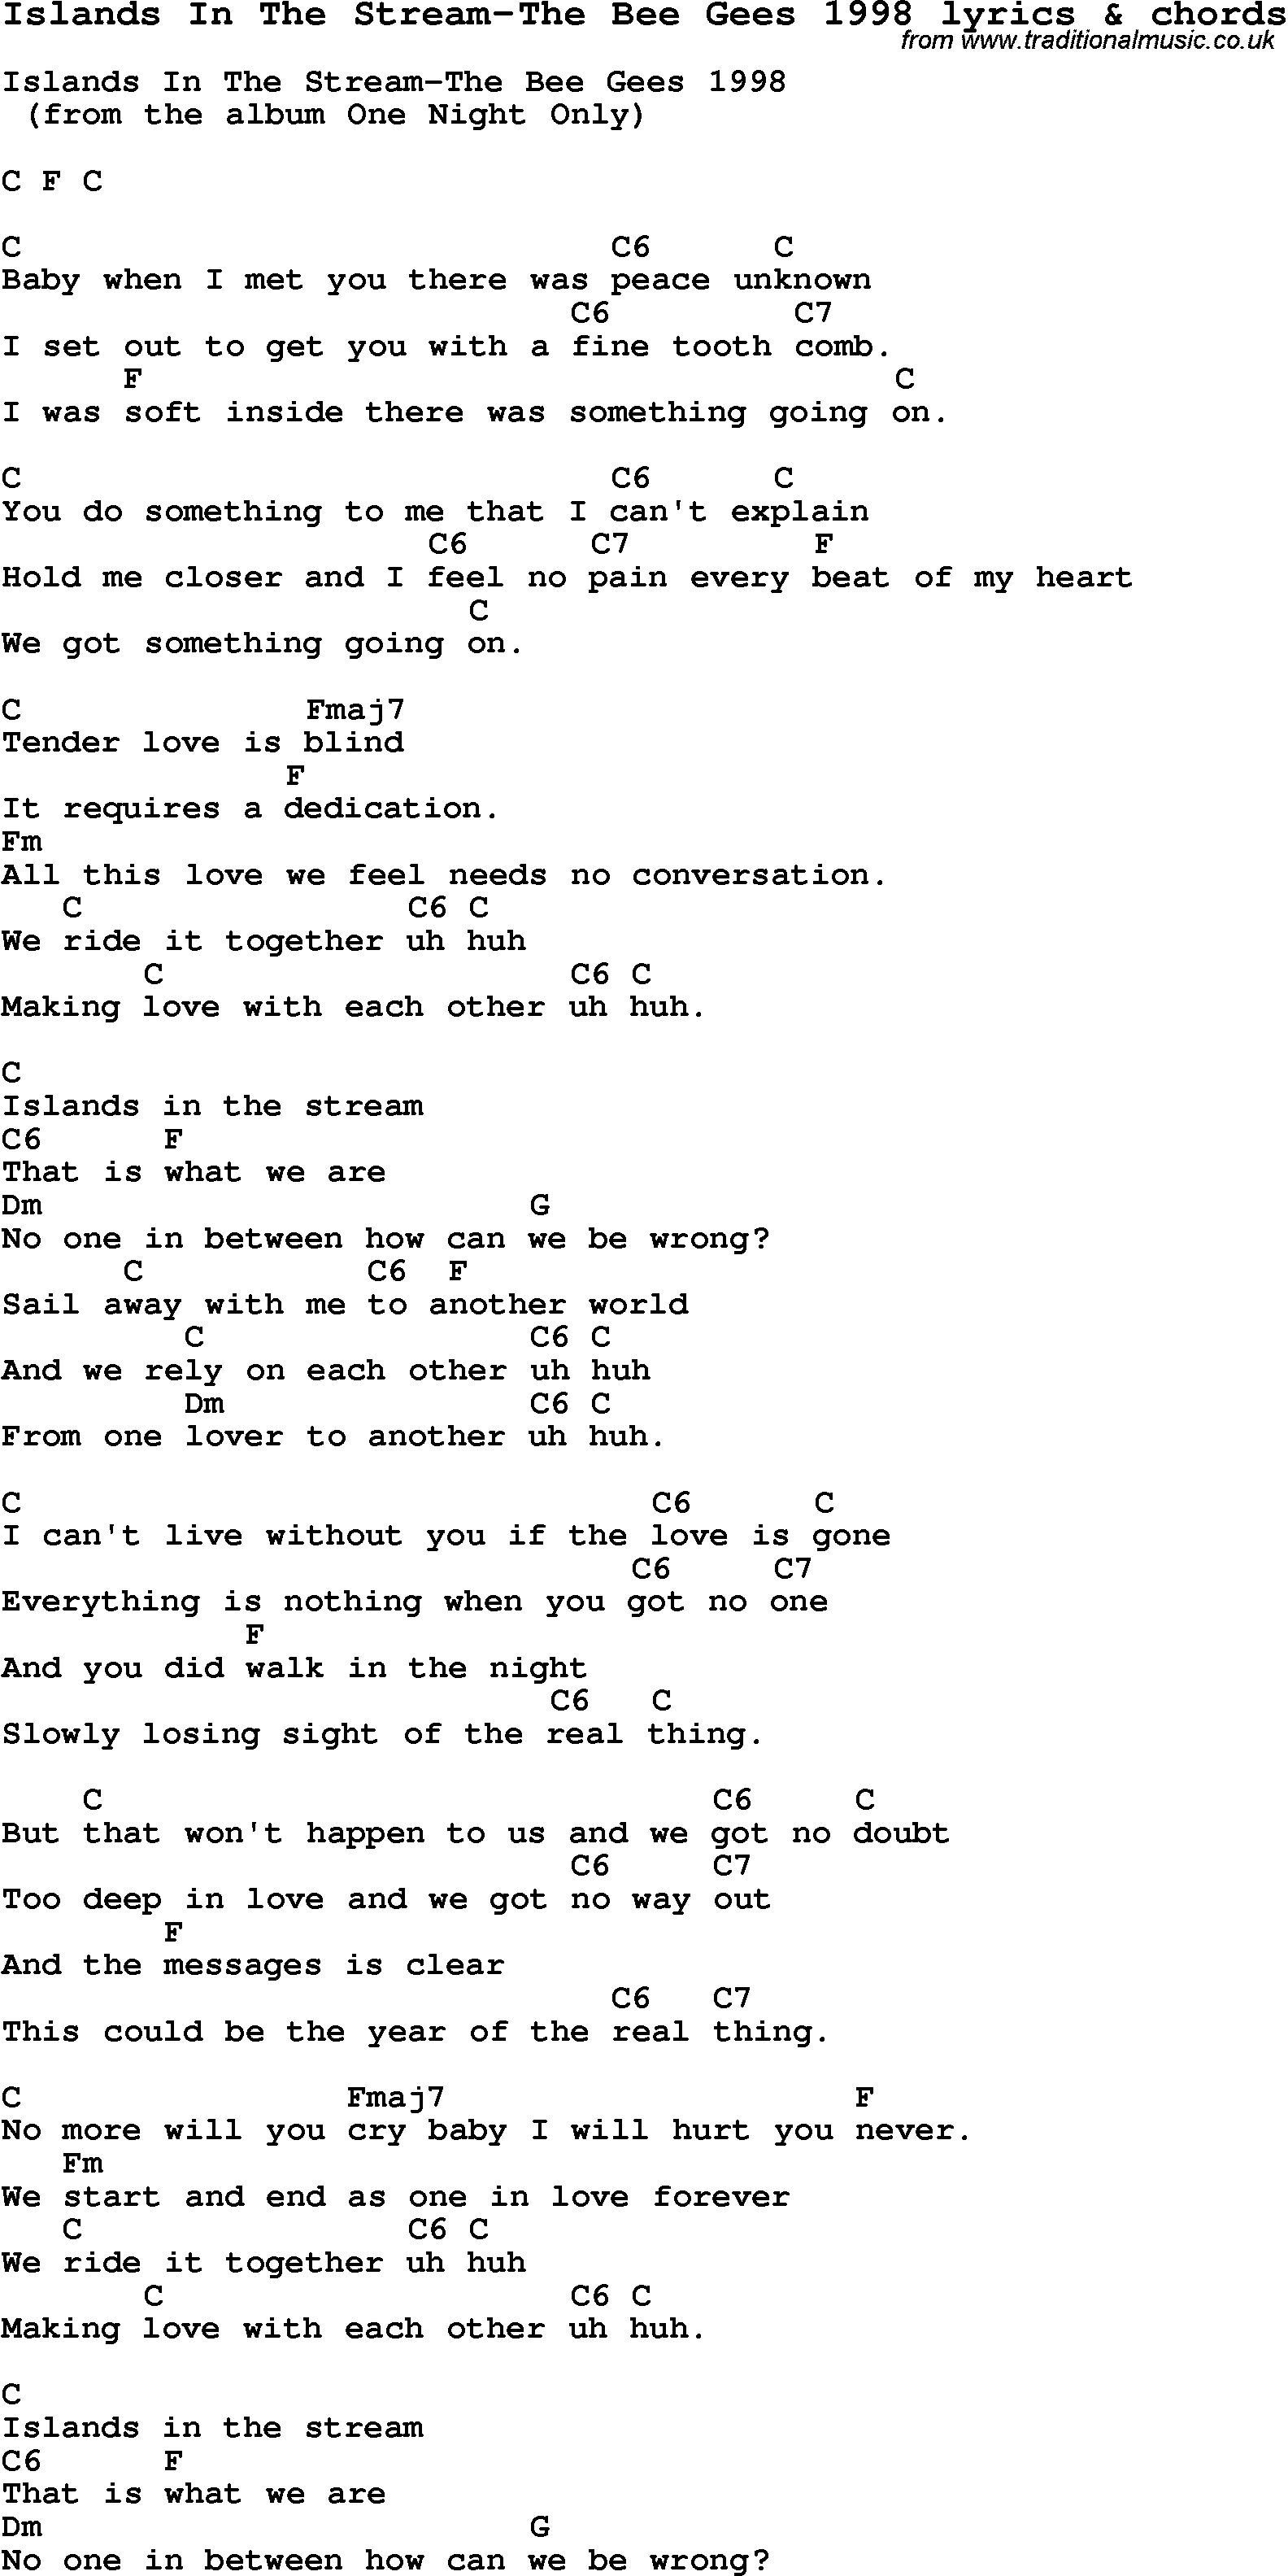 Love Song Lyrics for: Islands In The Stream-The Bee Gees 1998 with chords for Ukulele, Guitar Banjo etc.